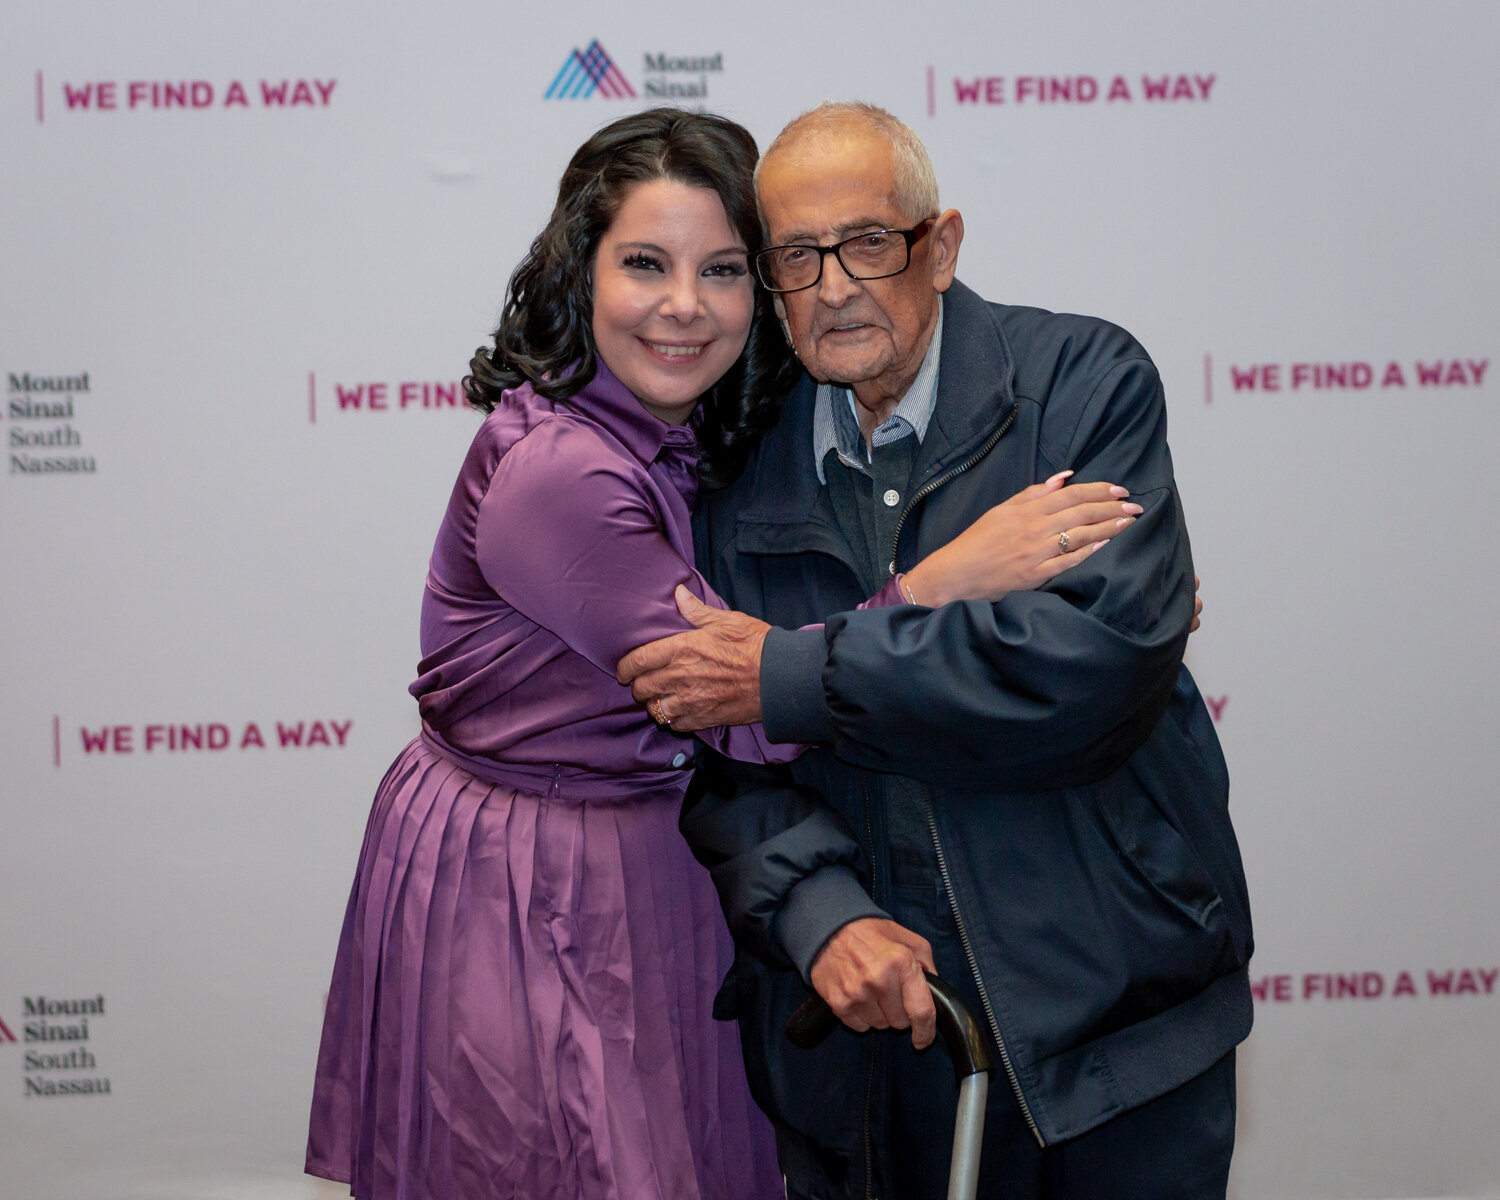 Angela Santopolo embraced her grandfather after sharing her breast cancer journey.